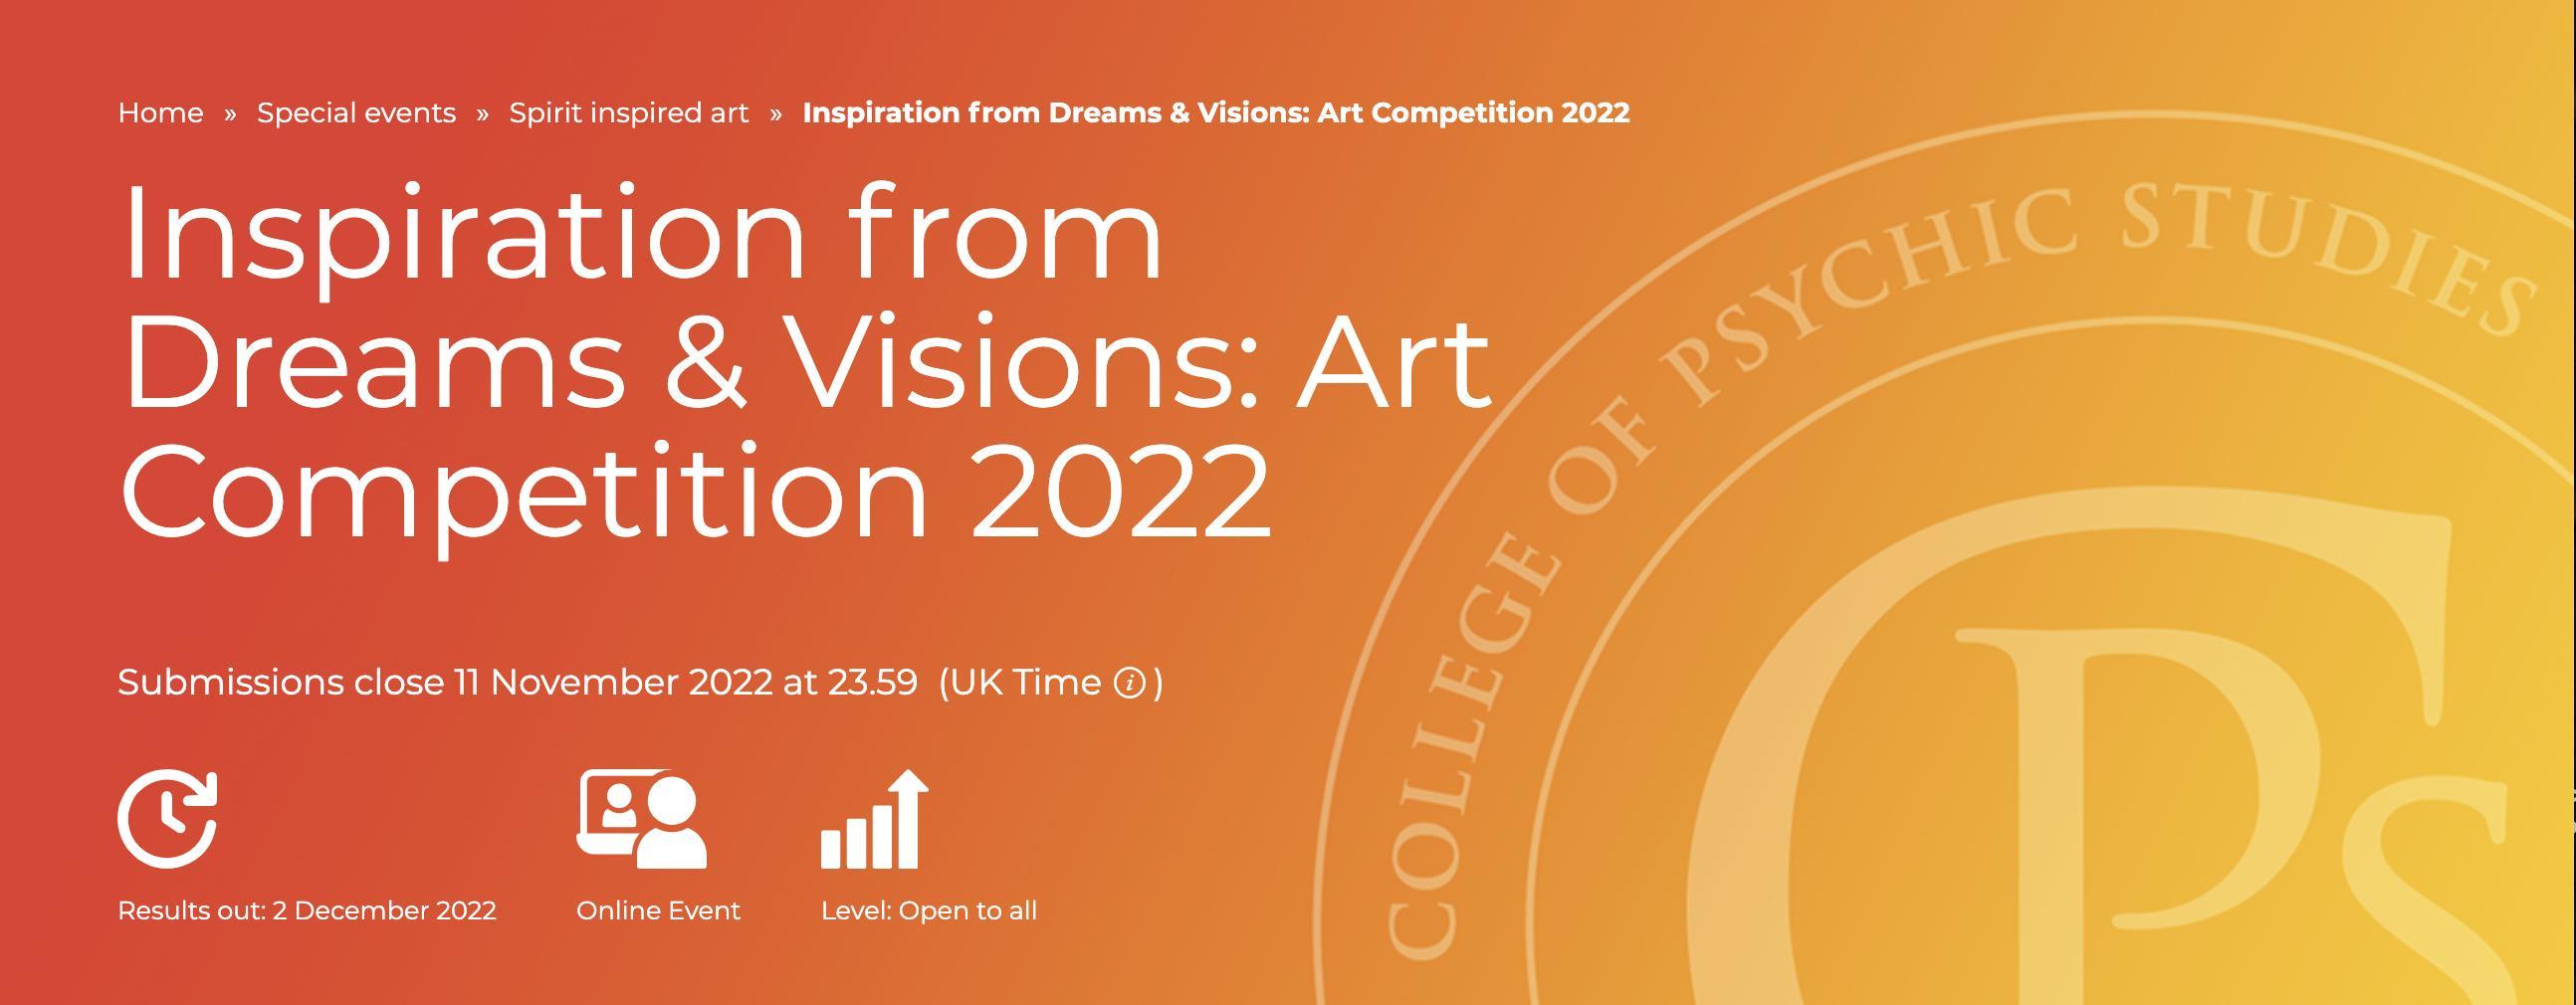 Inspiration from Dreams and Visions Art Competition 2022